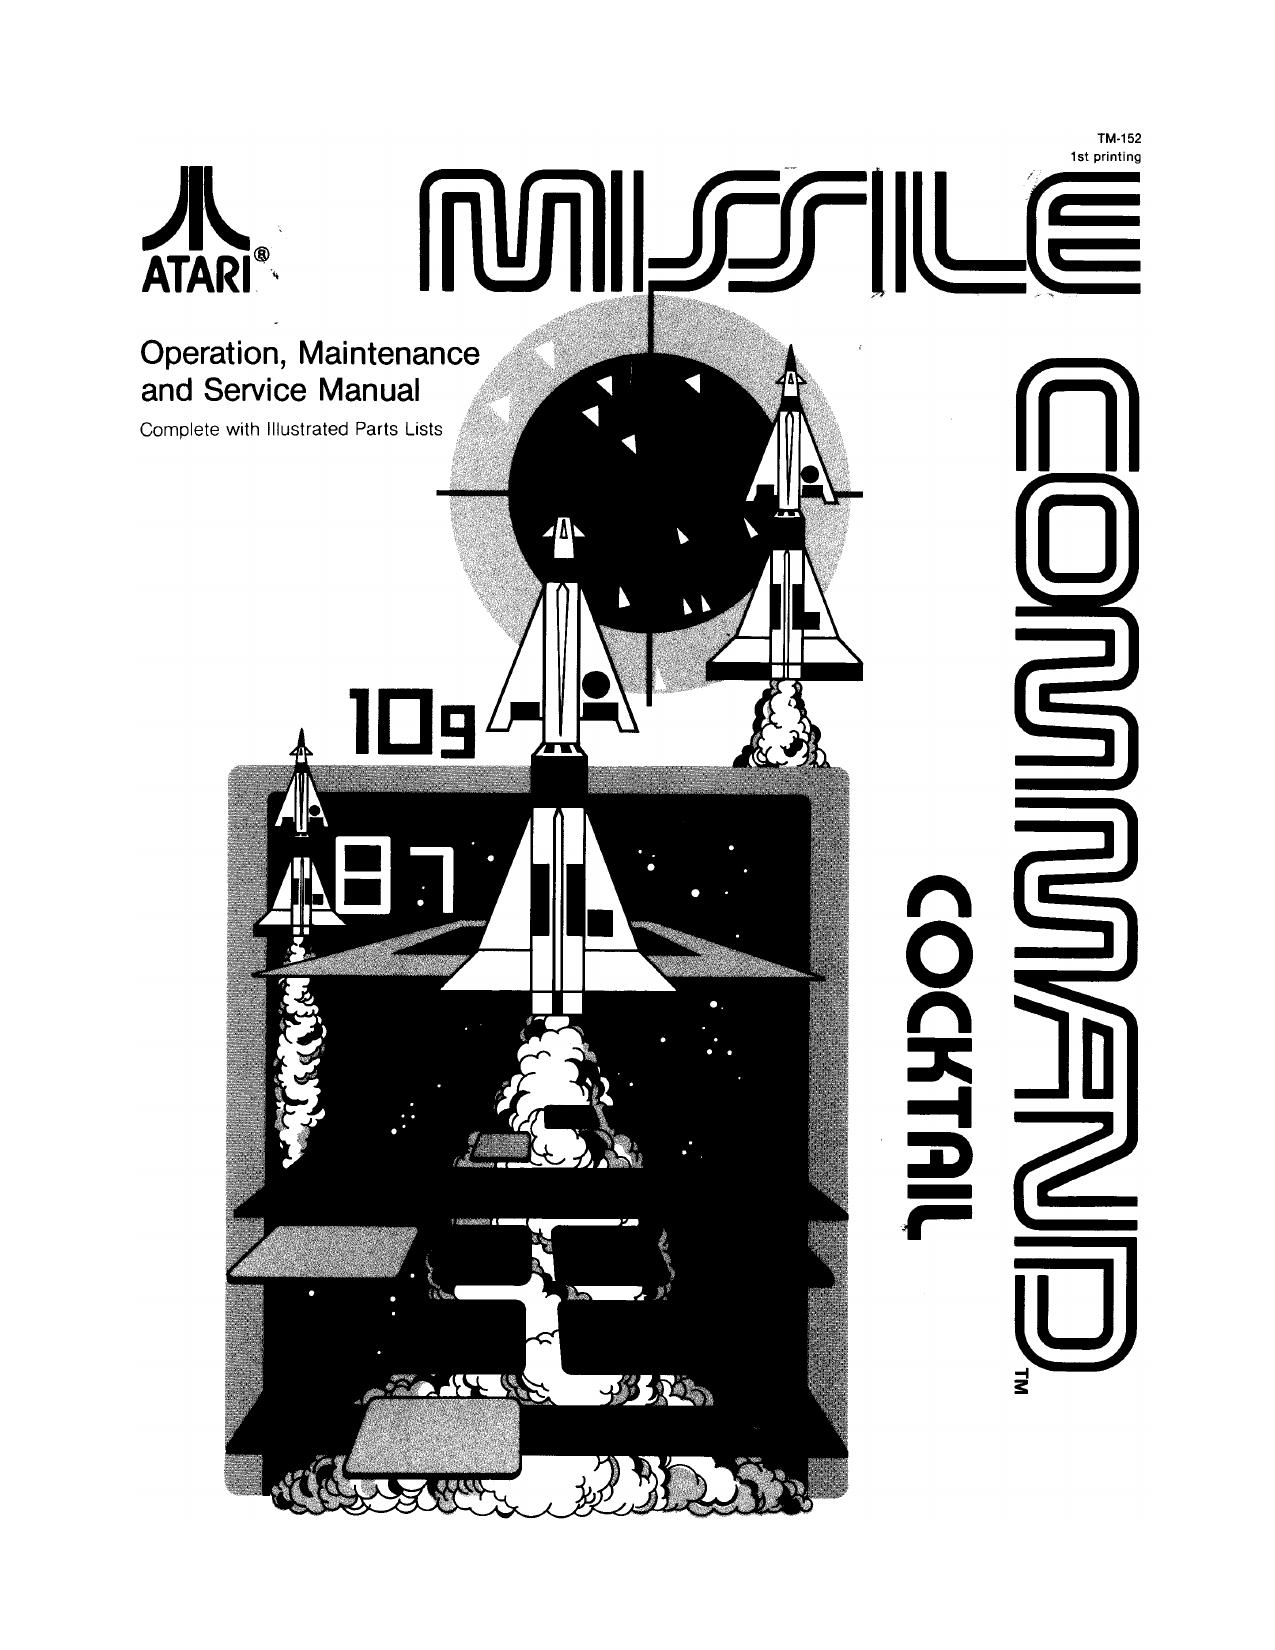 Missile Command Cocktail TM-152 1st Printing